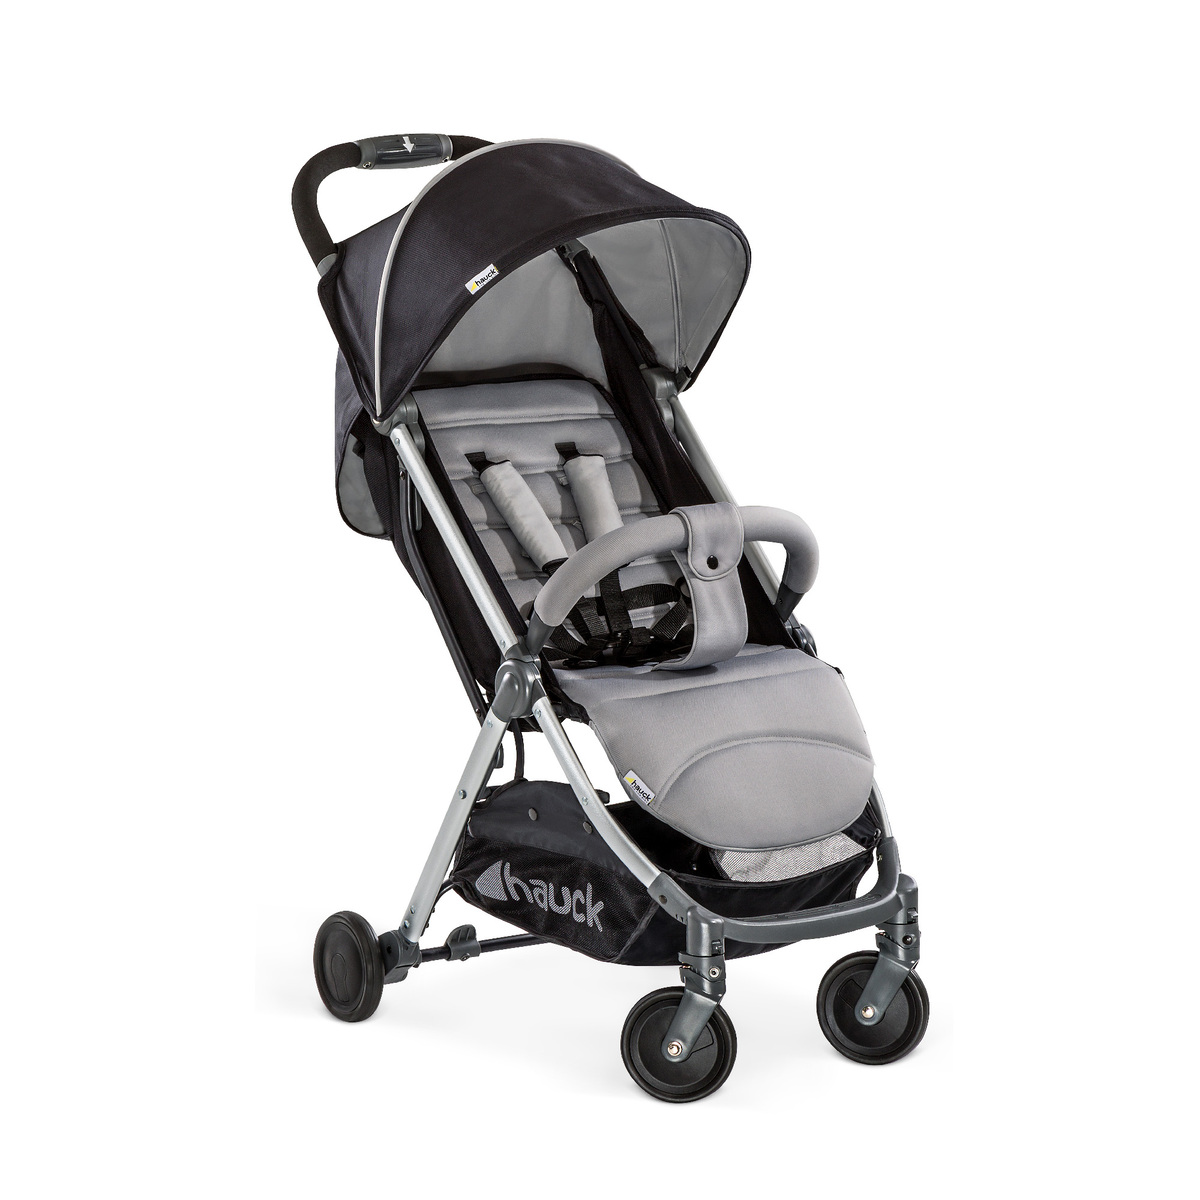 Hauck Baby Stroller 16012 Swift Plus Silver Charcoal